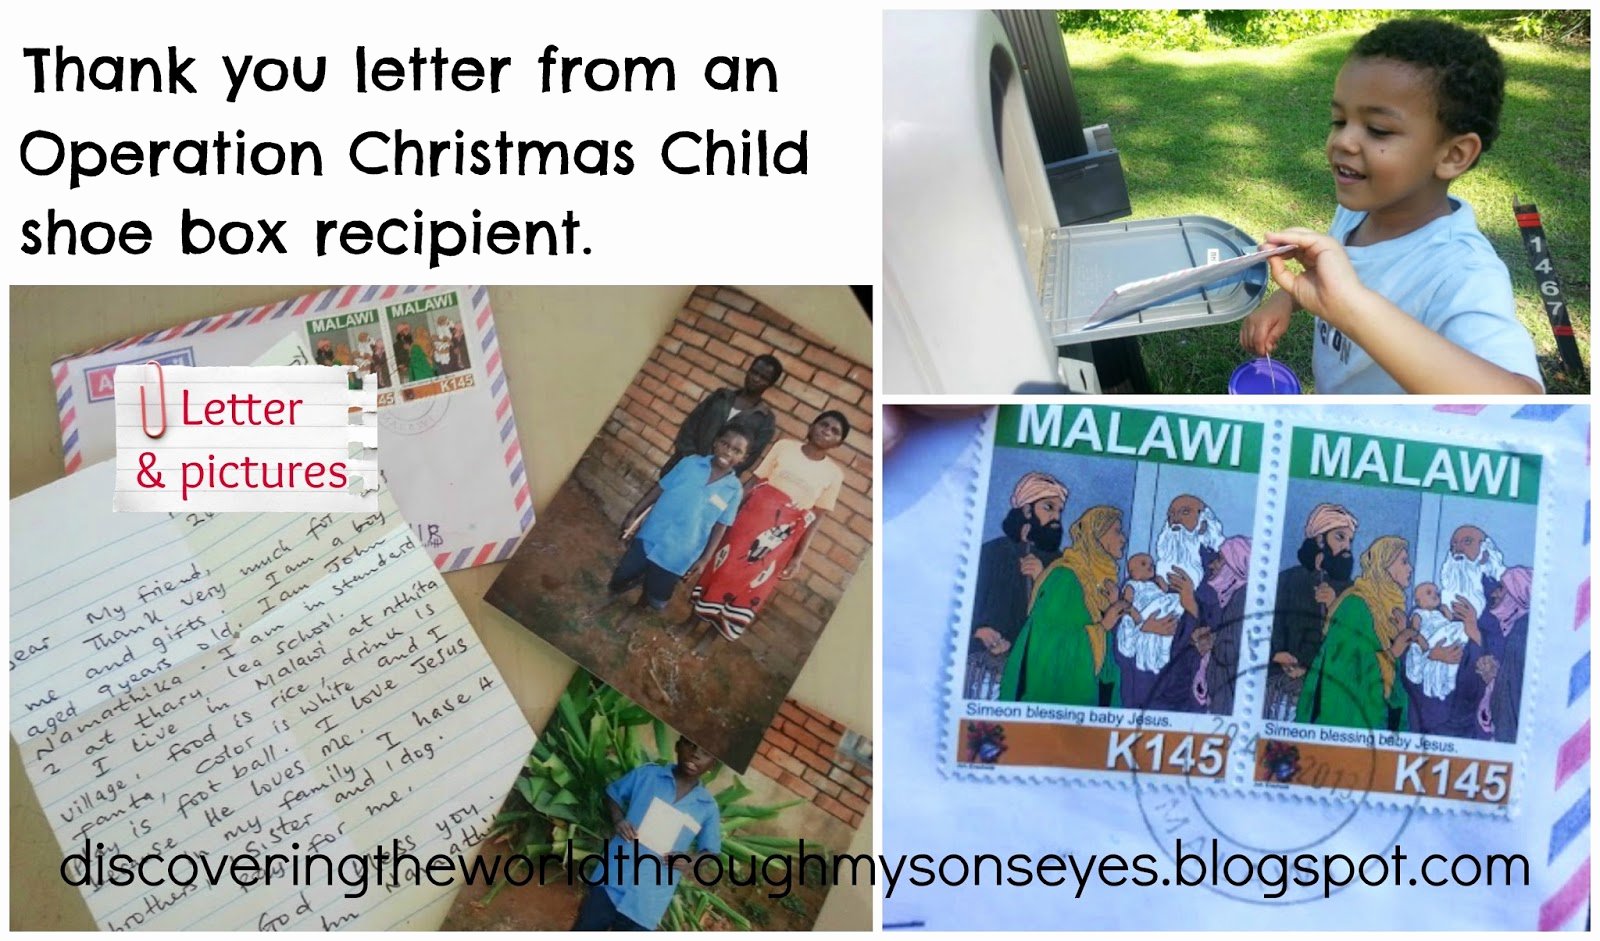 Operation Christmas Child Letter Samples Lovely Discovering the World Through My son S Eyes Thank You